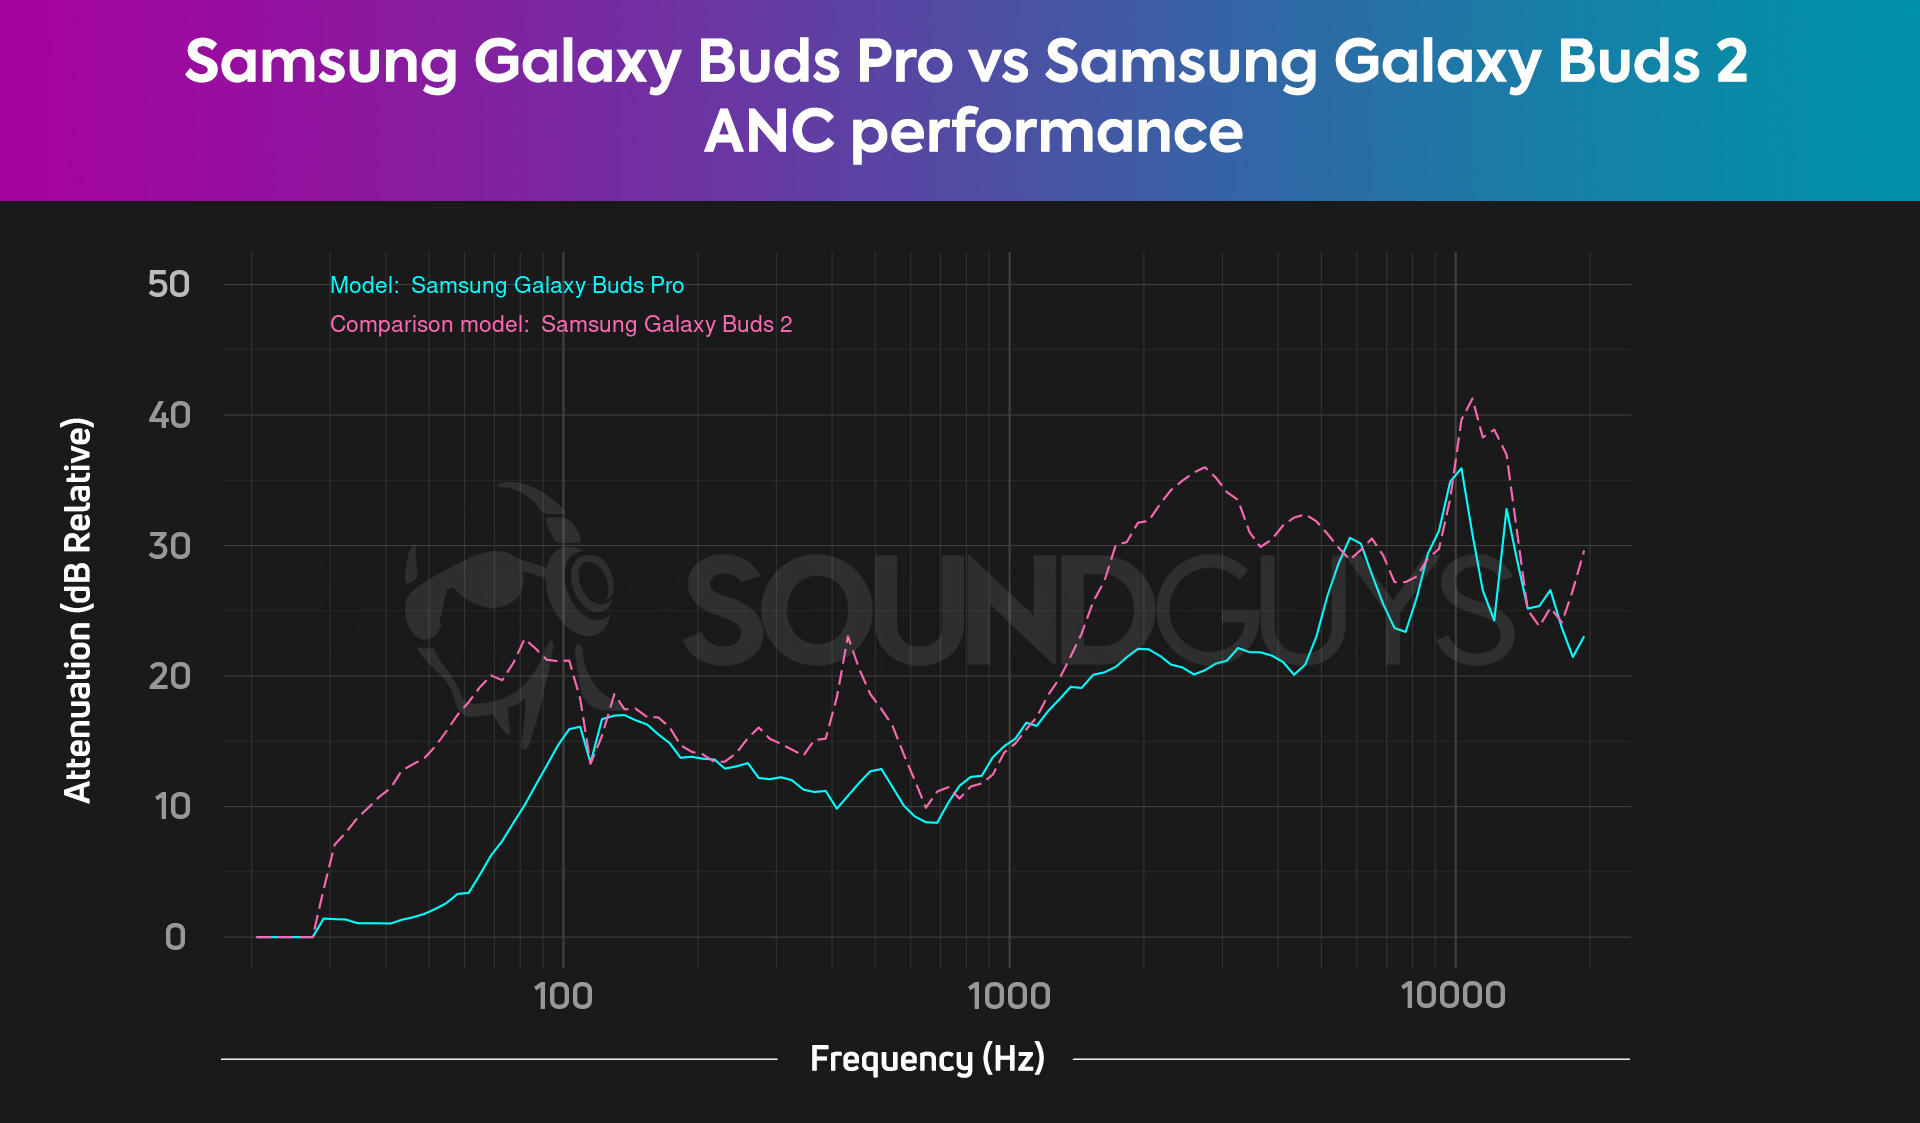 A chart compares the Samsung Galaxy Buds Pro noise canceling to the Galaxy Buds 2 and shows that the Buds 2 has slightly better ANC/isolation.